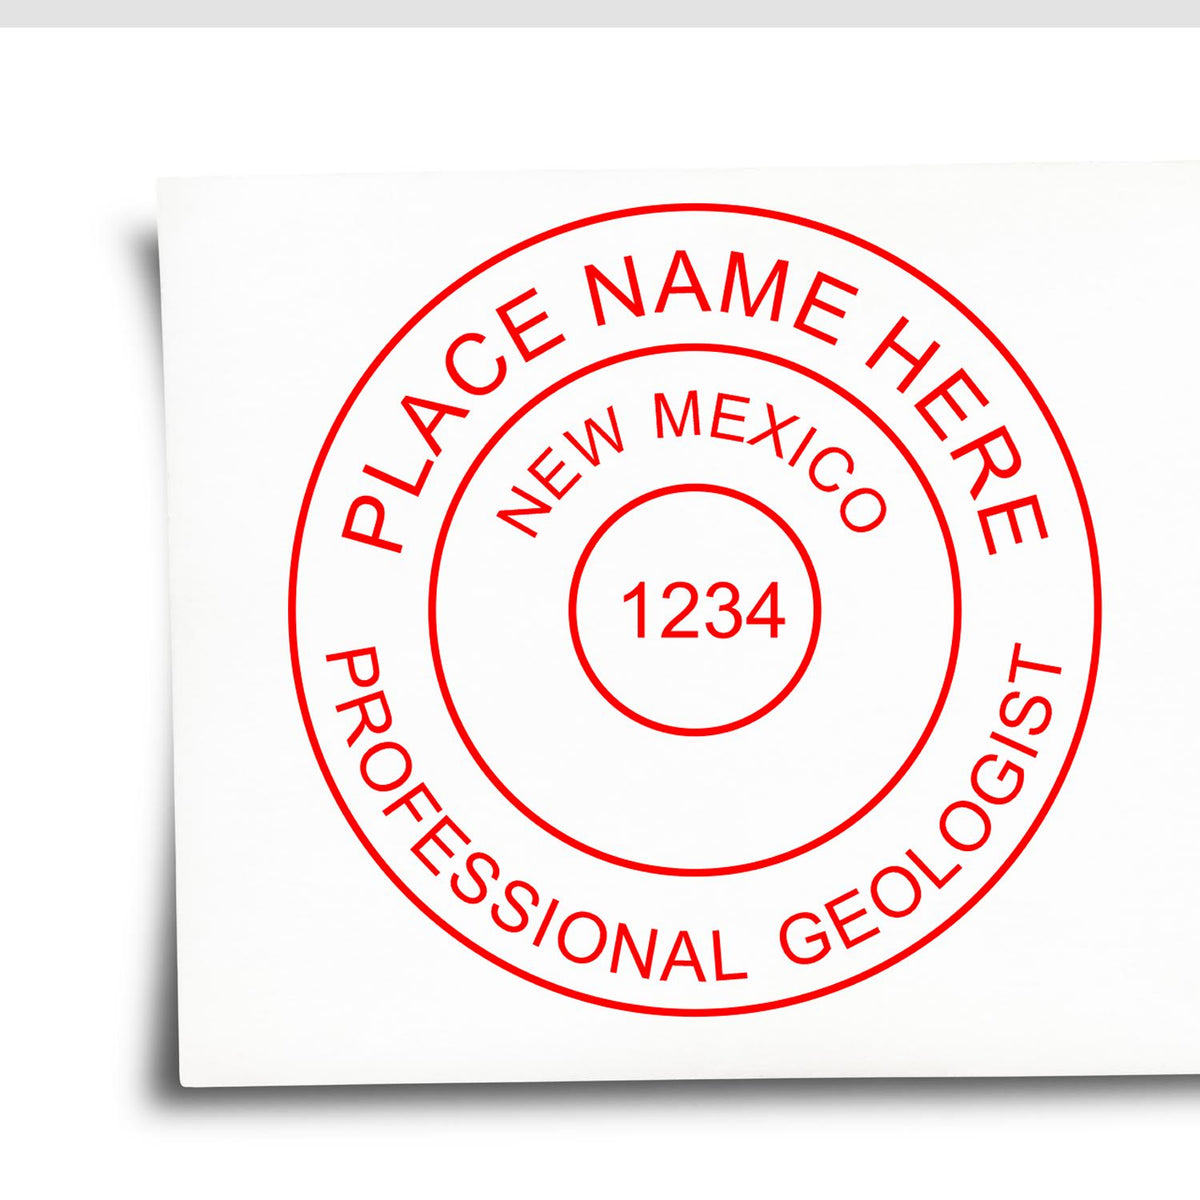 A lifestyle photo showing a stamped image of the New Mexico Professional Geologist Seal Stamp on a piece of paper